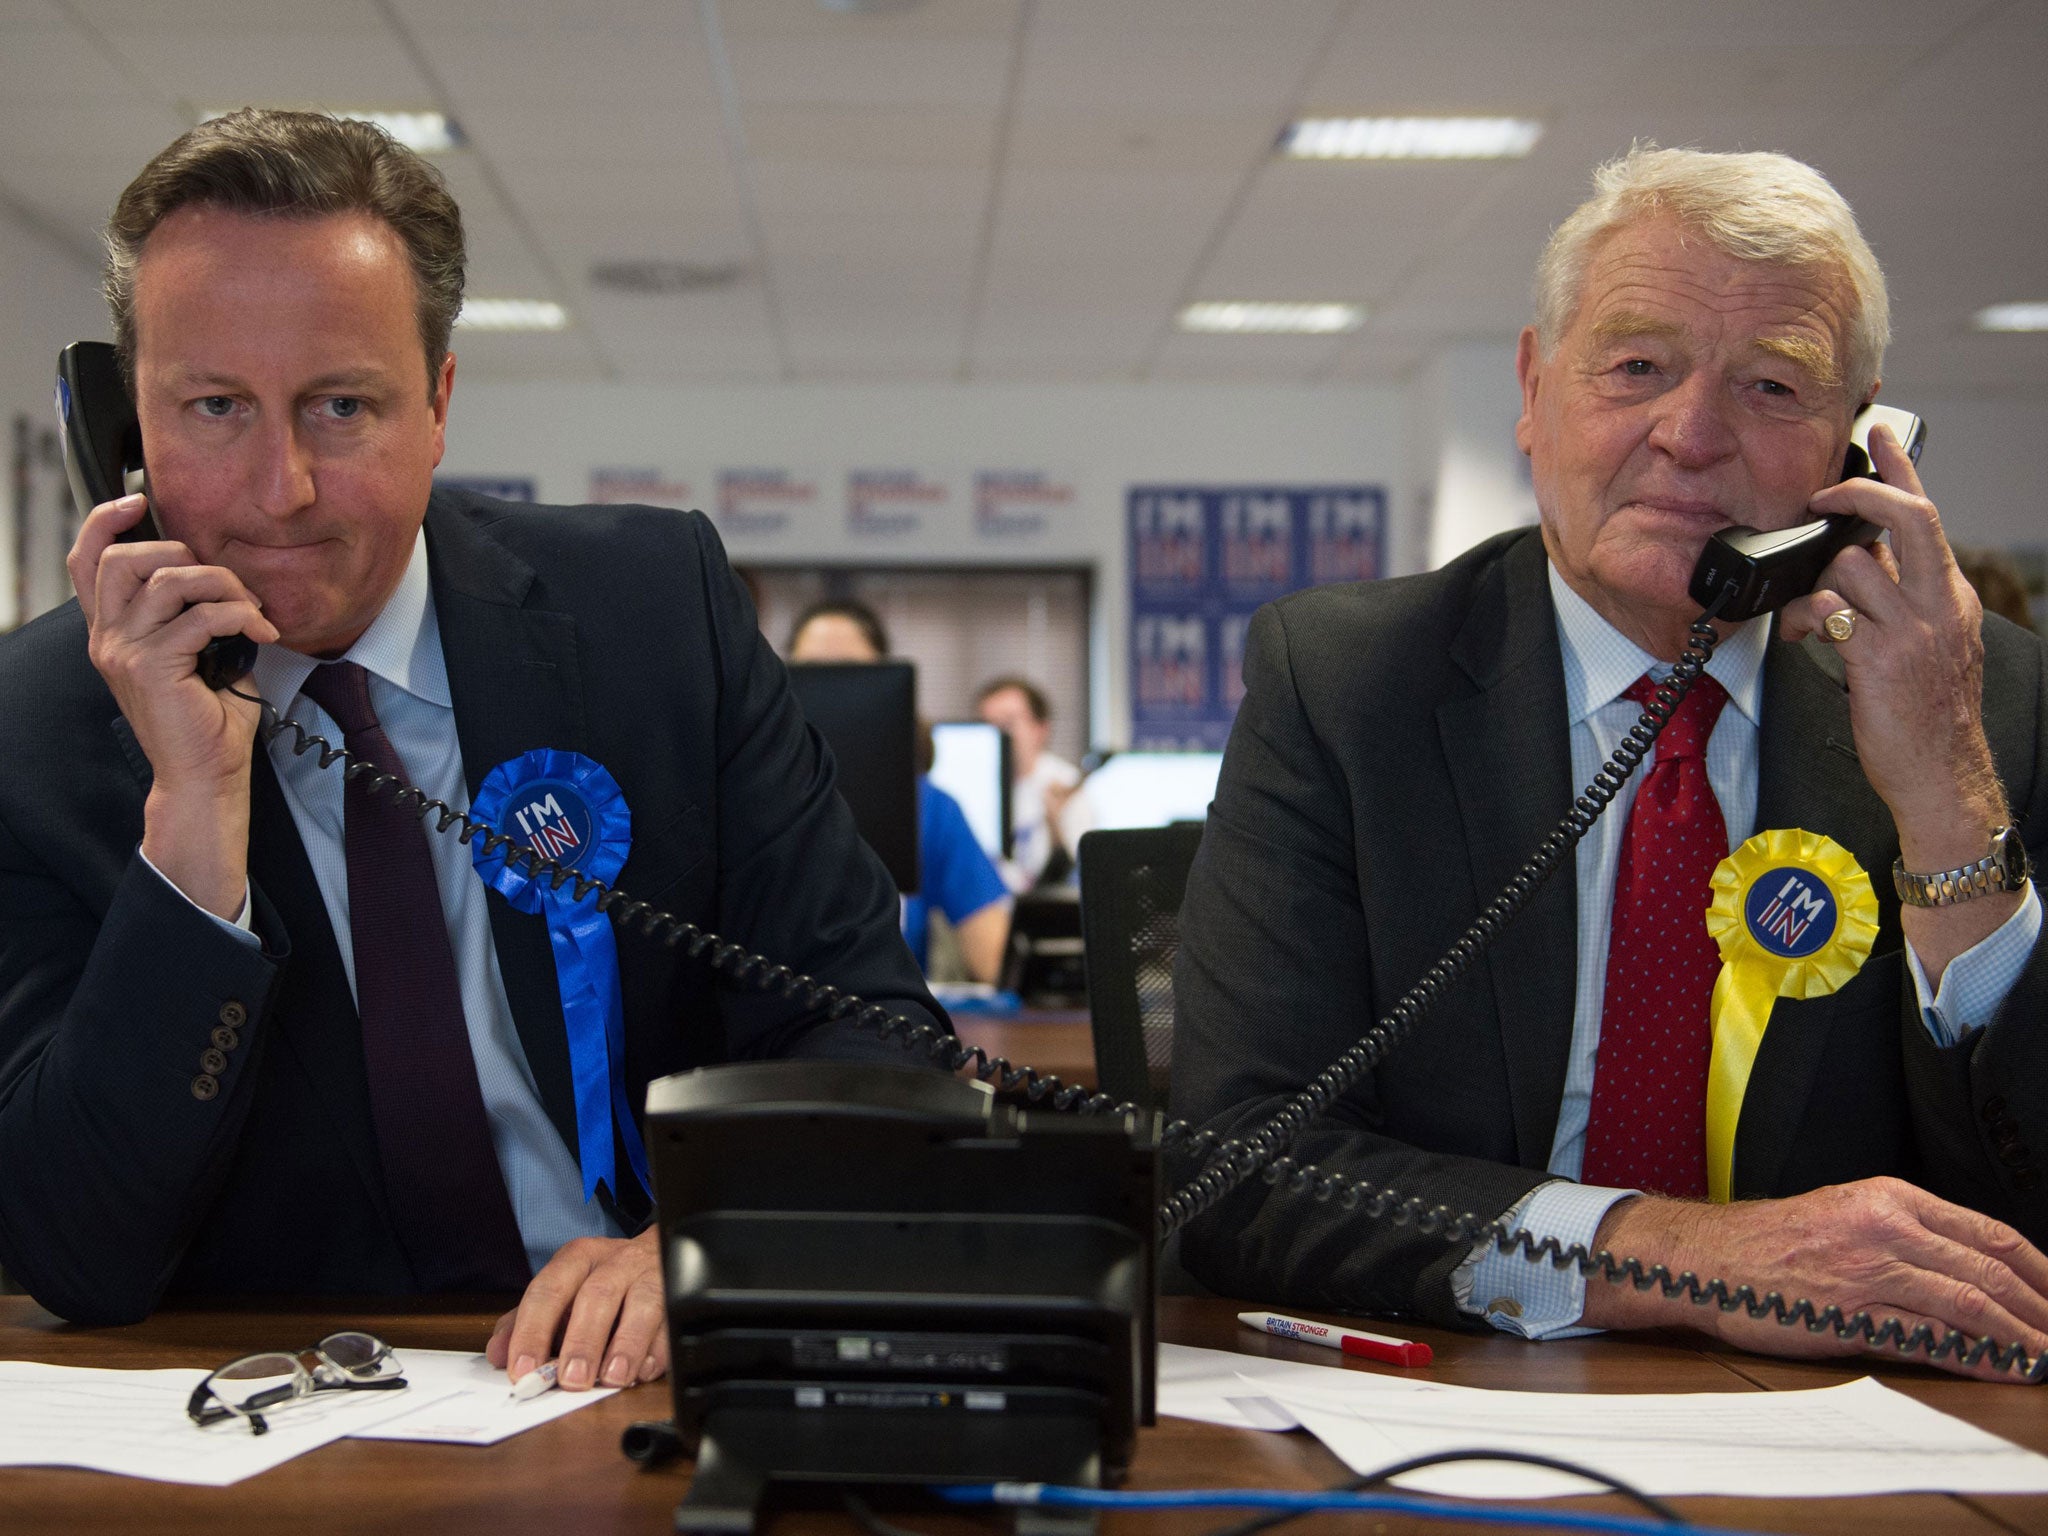 Prime Minister David Cameron helps to campaign for a 'Remain' vote in the forthcoming EU referendum at a phone centre in London along with fellow pro EU campaigners, Lord Ashdown